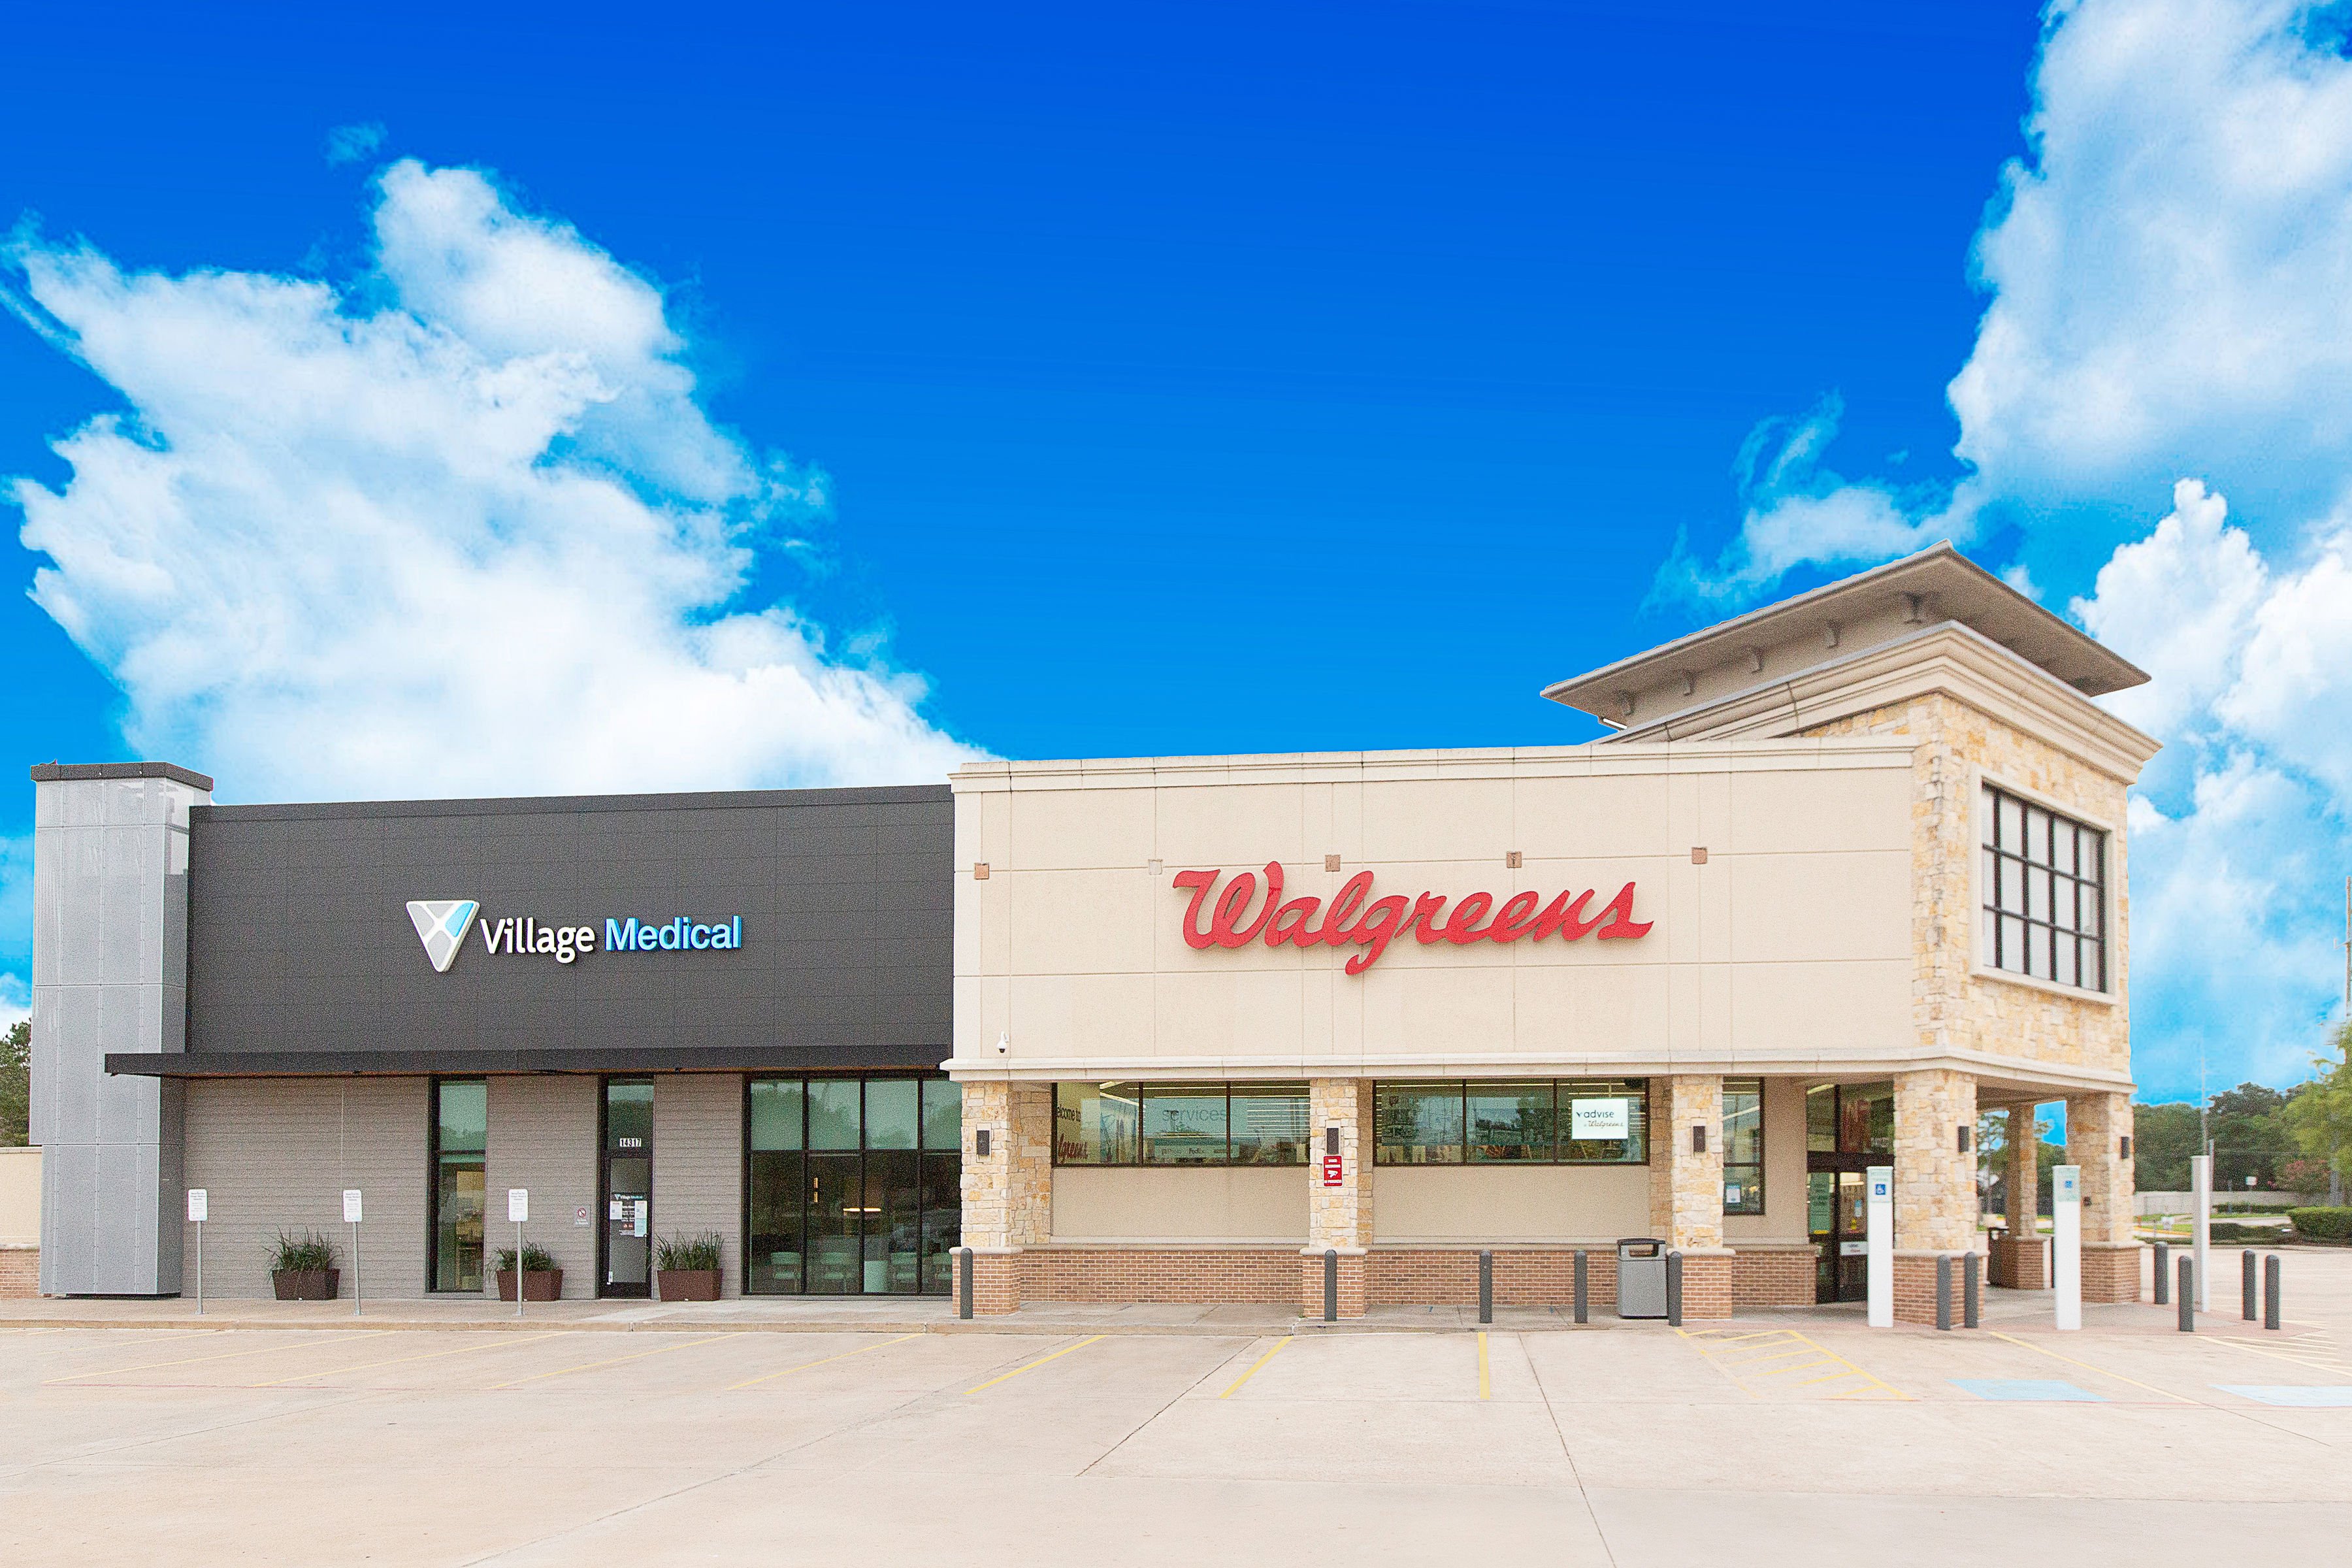 Walgreens plans to open up to 700 primary care clinics as part of $1B  investment in VillageMD | Fierce Healthcare